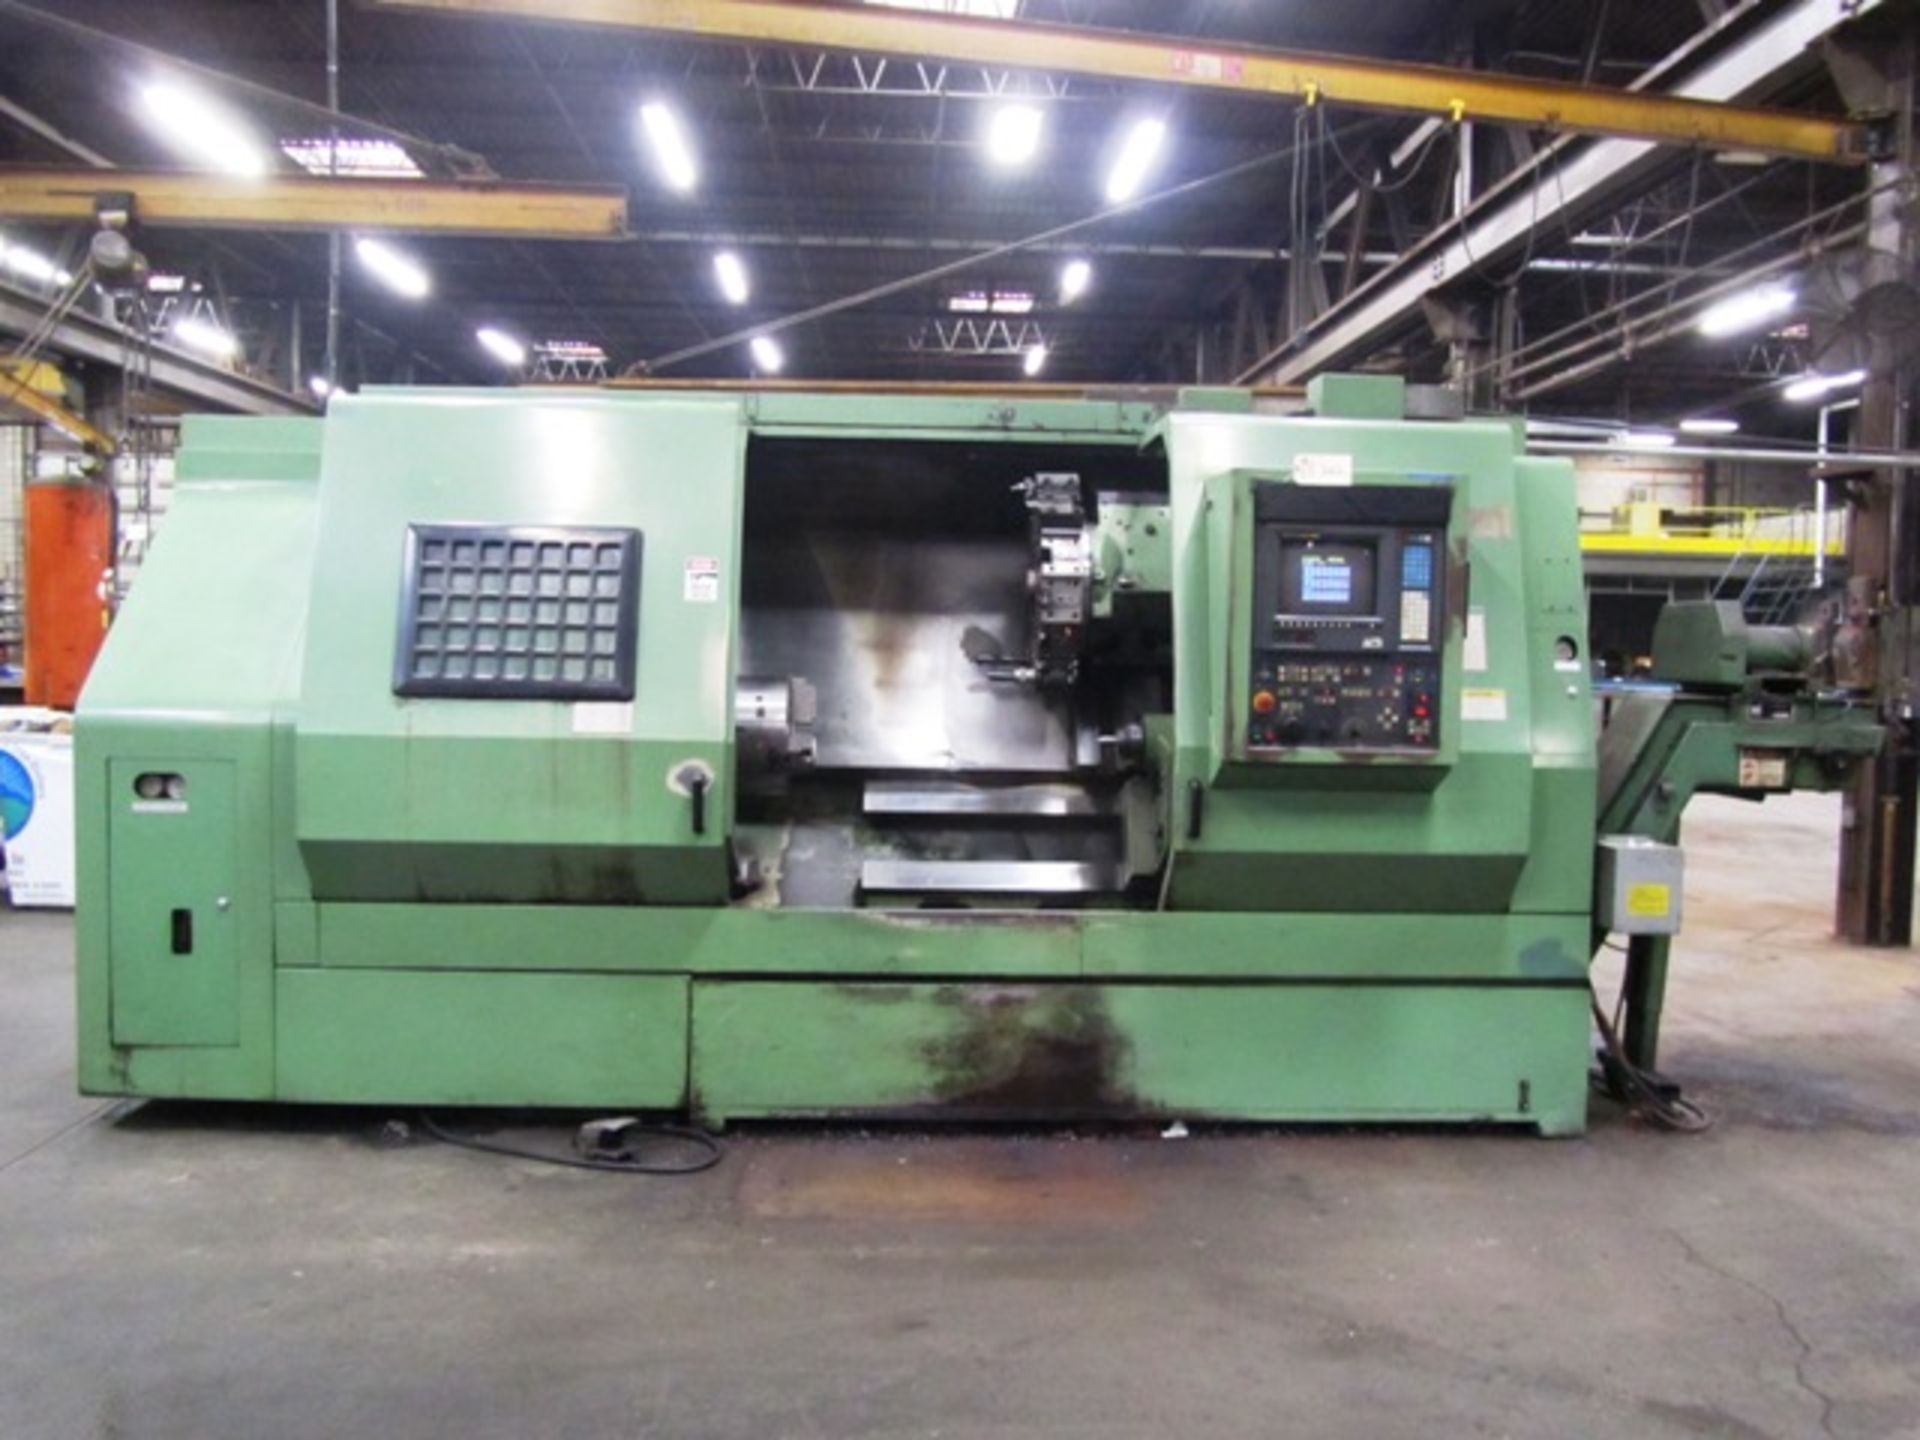 Mori Seiki SL-45B/1000 CNC Turning Center with 15'' 3-Jaw Chuck, 26.4'' Swing Over Bed, 46.5''